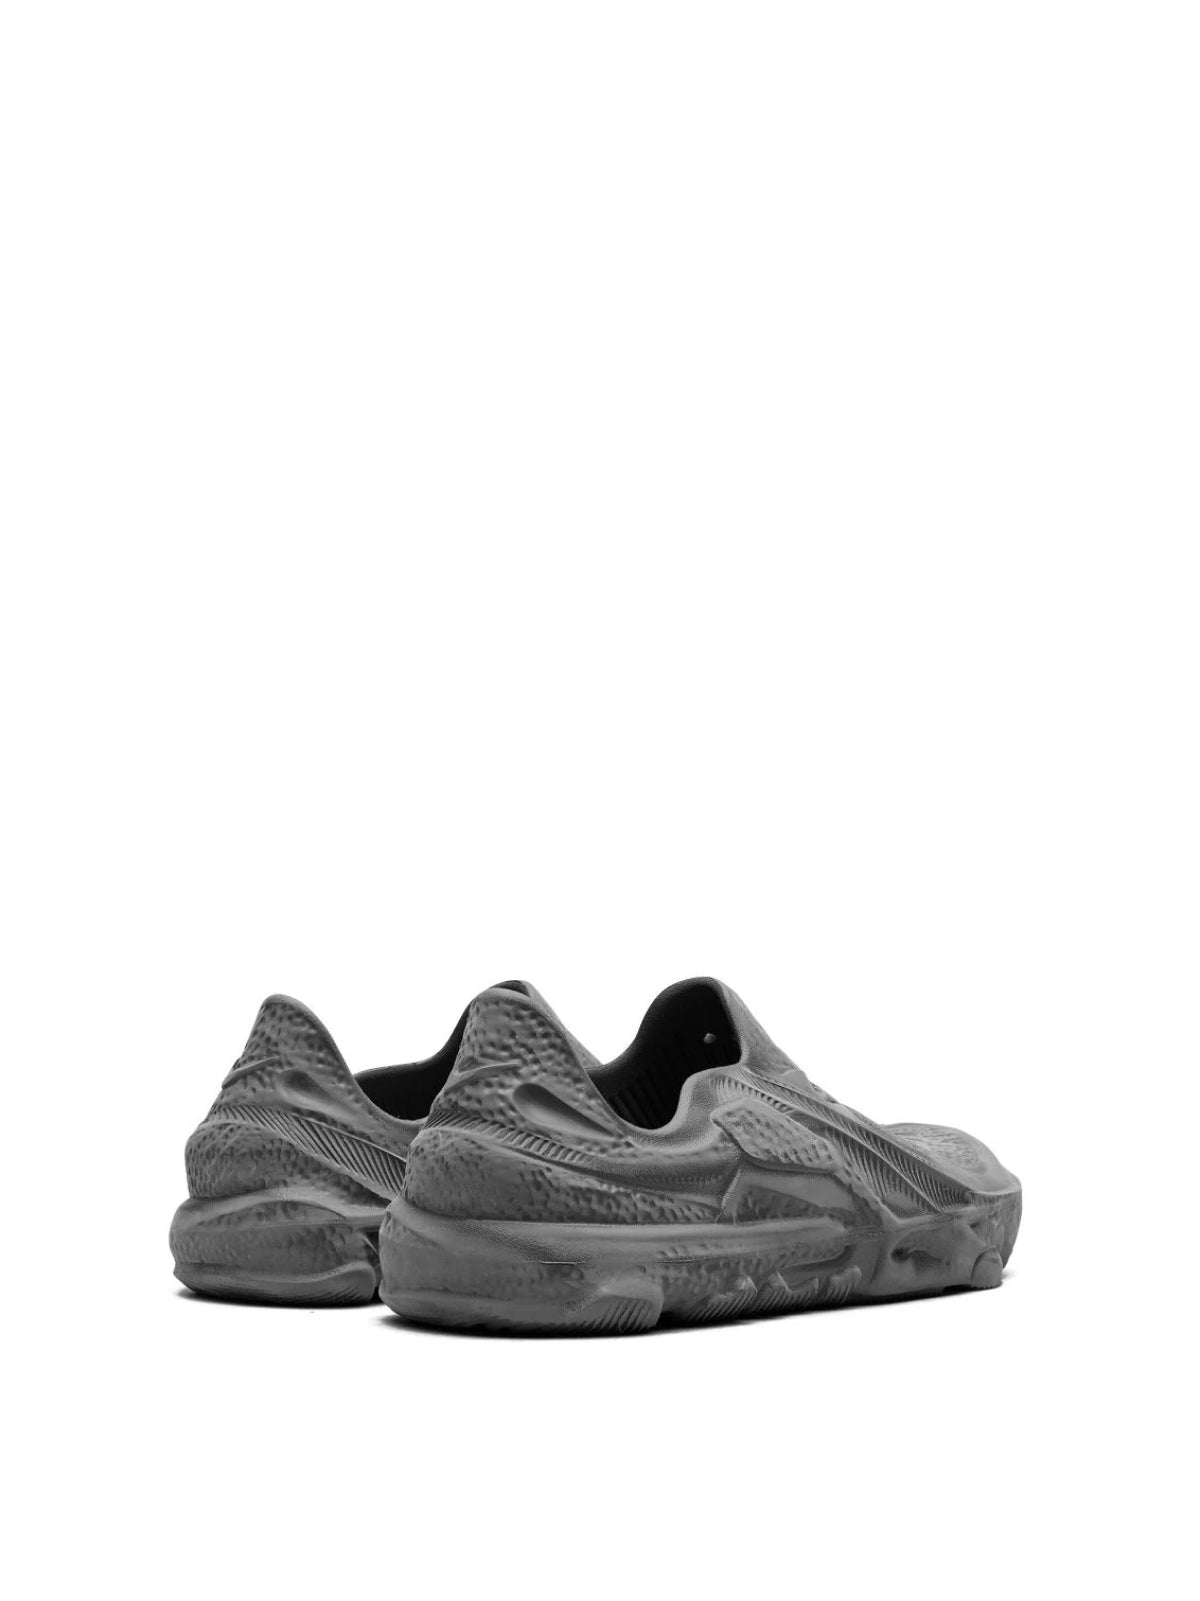 Nike-OUTLET-SALE-ISPA Universal Sneakers-ARCHIVIST